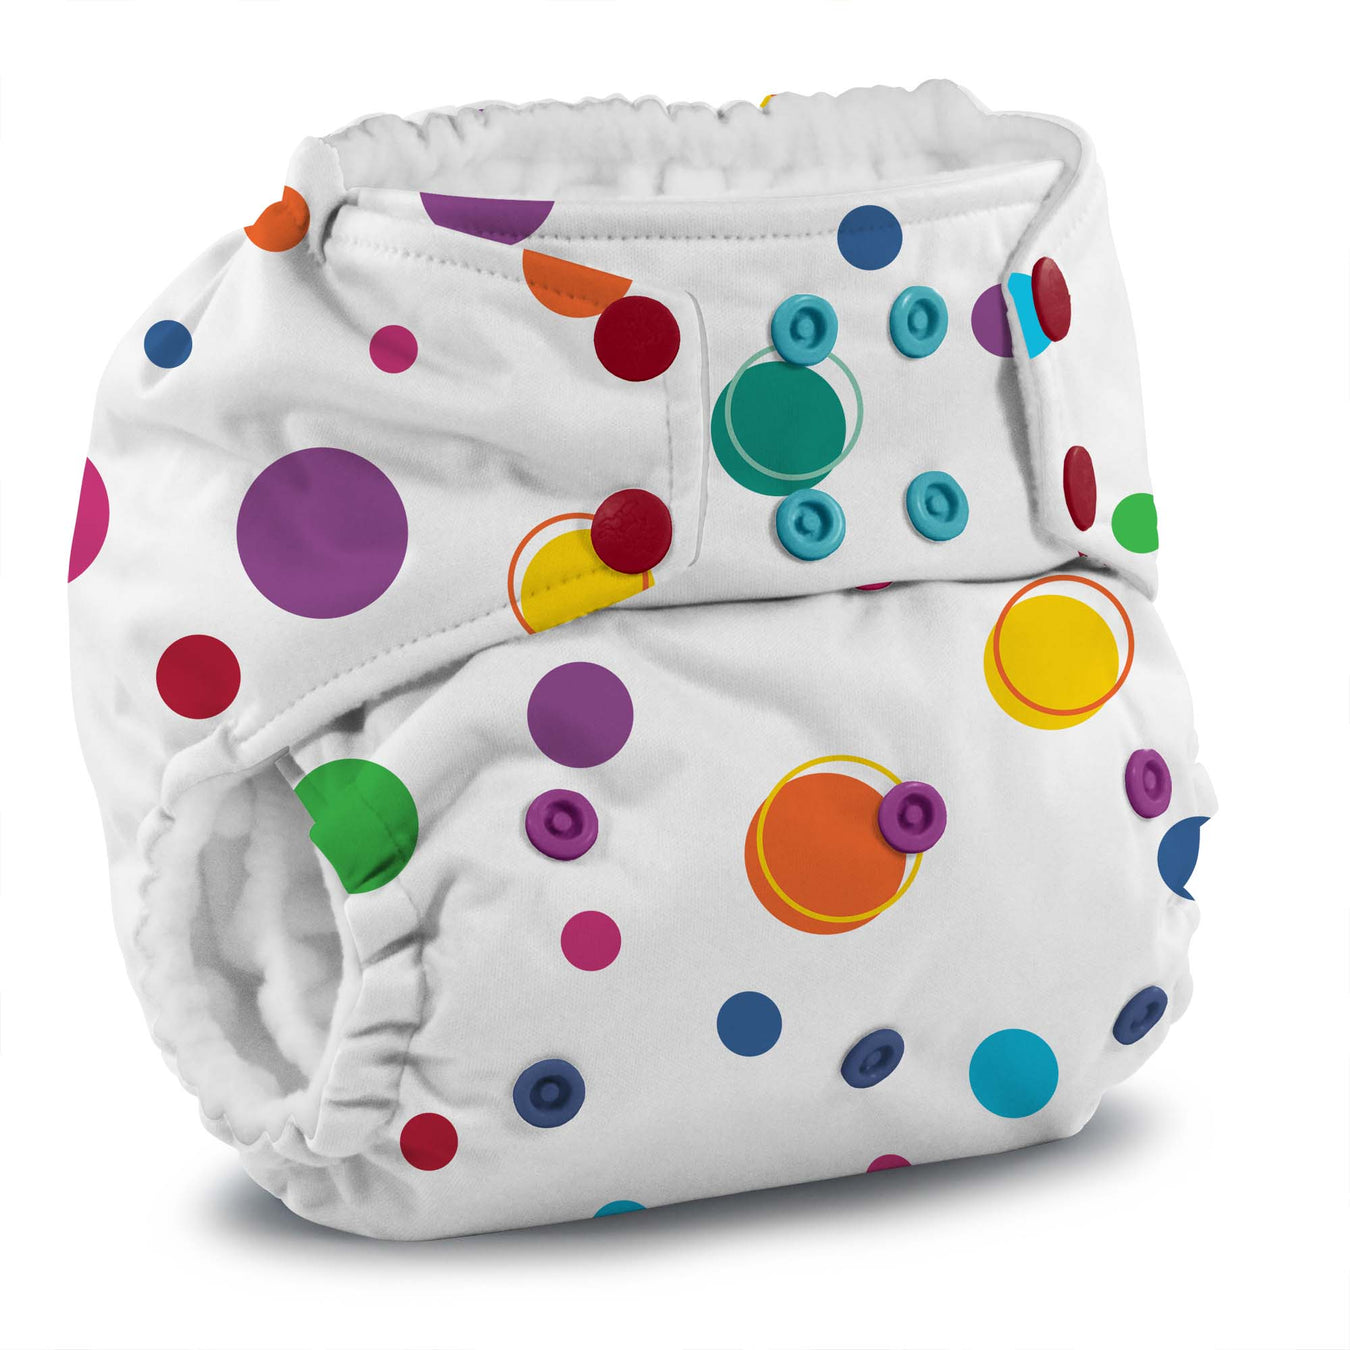 Youth Cloth Diapering Products